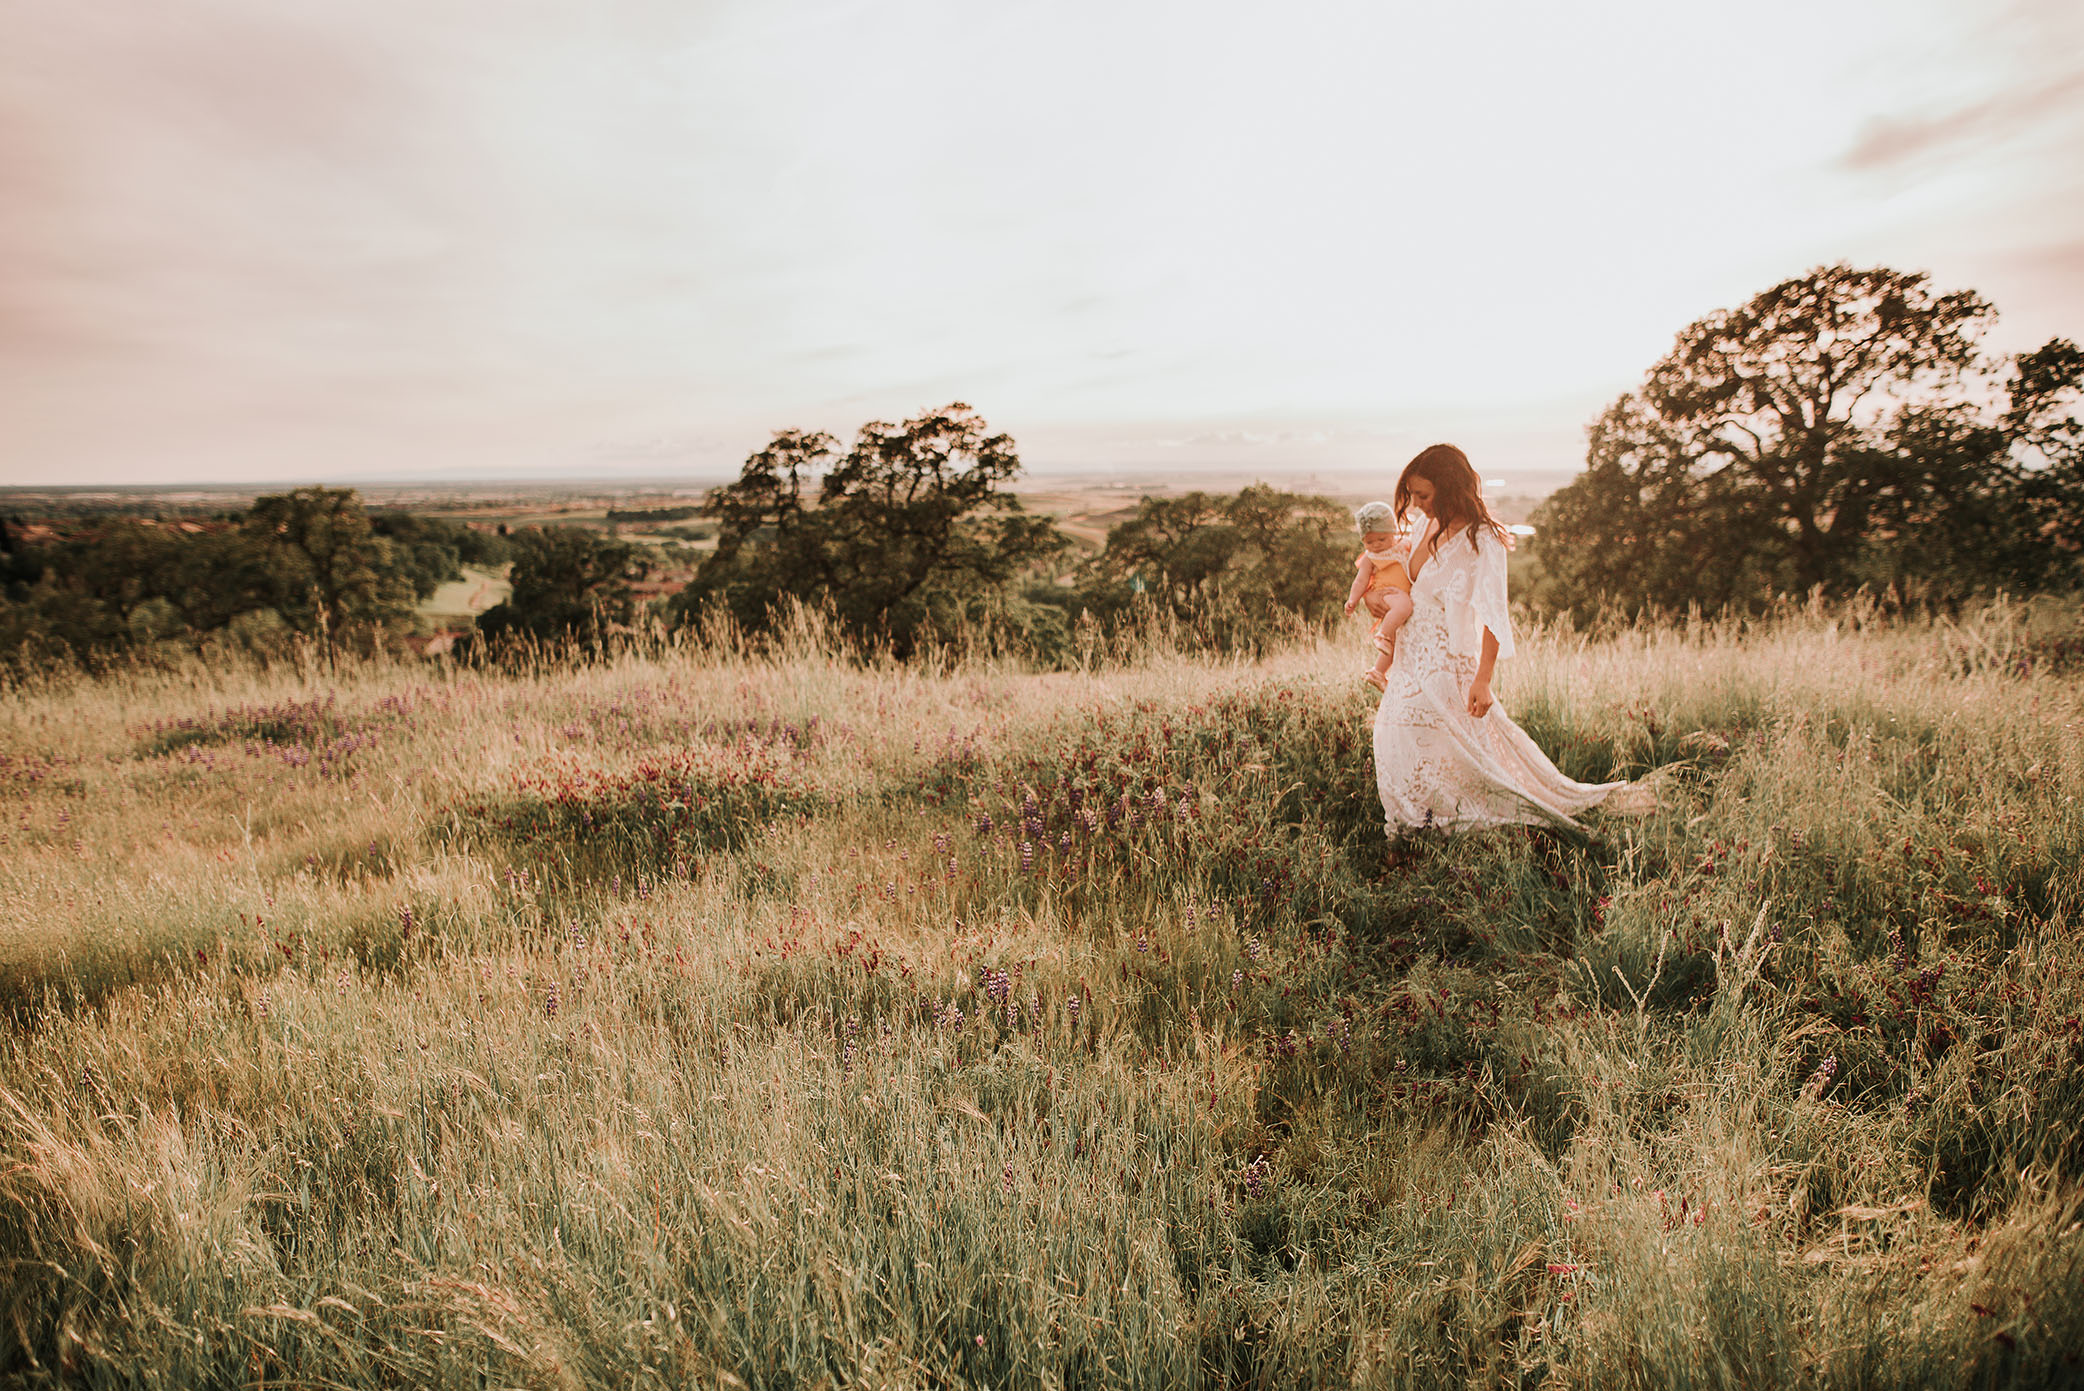 Mom looking ethereal while walking on grassy hill captured by Sweet Beginnings Photography by Stephanie 